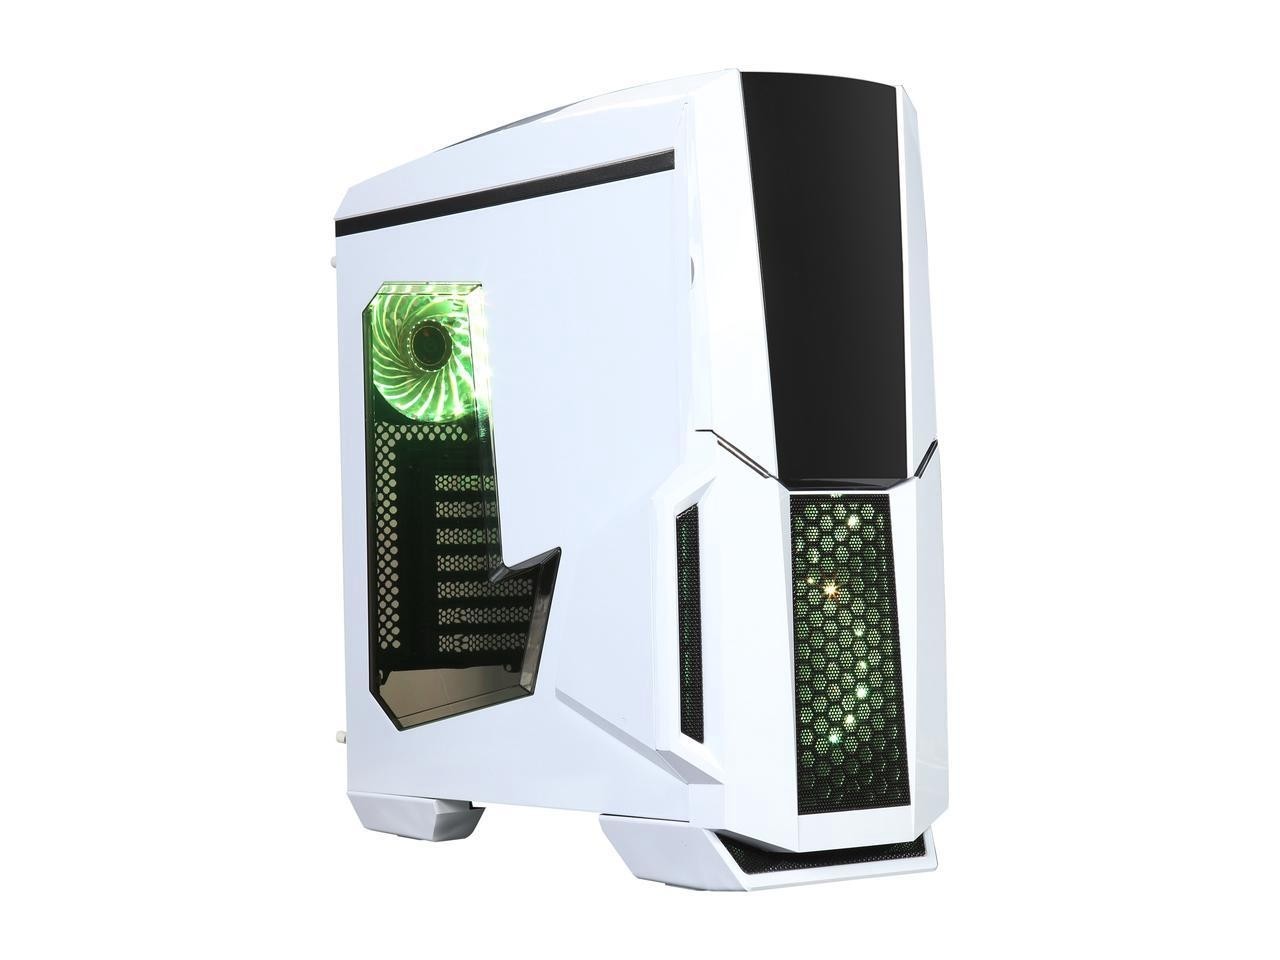 DIYPC Gamemax-W-RGB White Dual USB 3.0 ATX Full Gaming Computer Case with Build-in x RGB LED Fans and RGB Remote Control - RGB Fan - Computer Case - Products